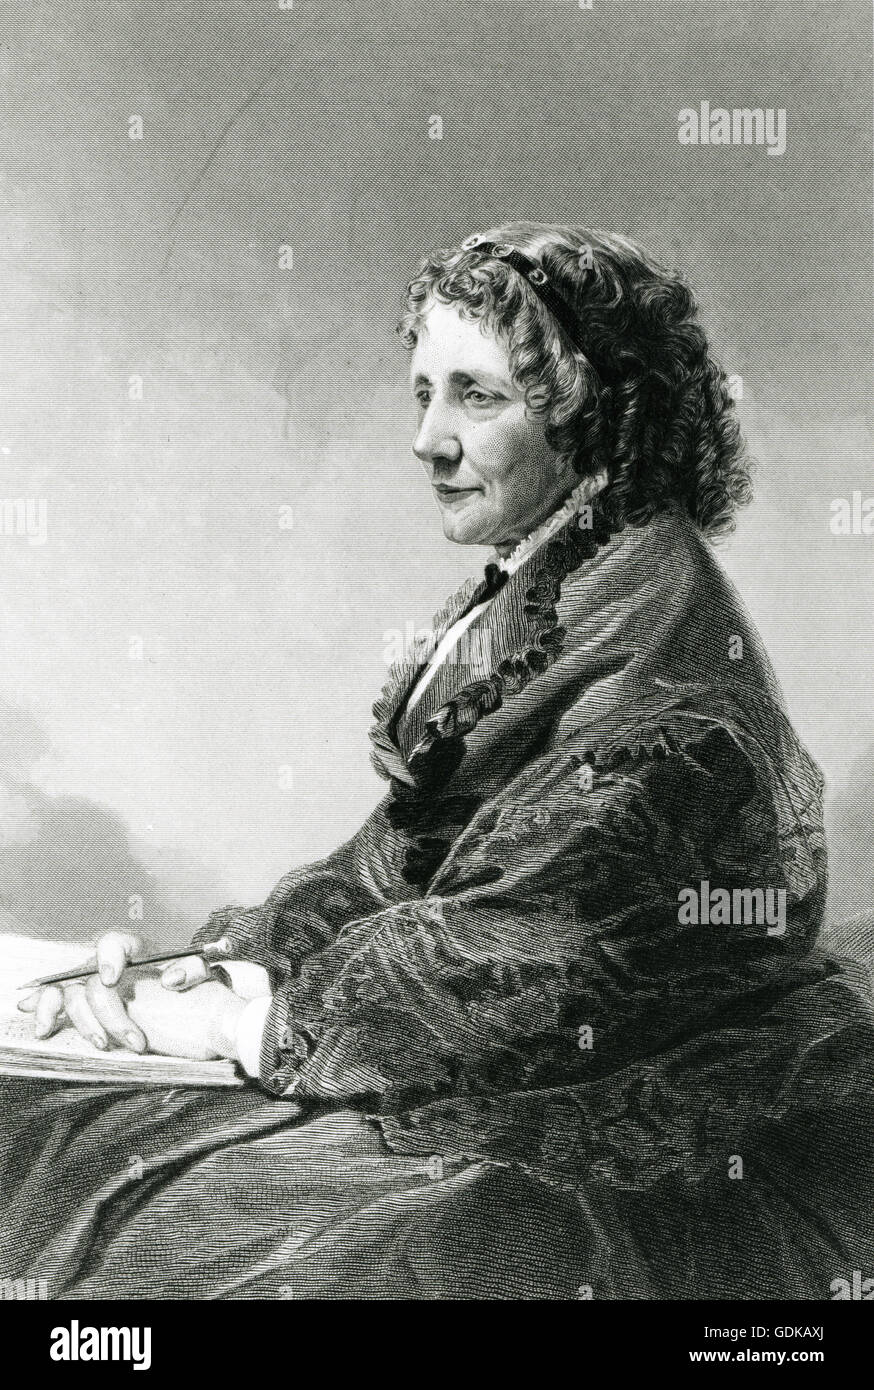 Harriet Beecher Stowe, American abolitionist and author of UNCLE TOM'S CABIN. Stock Photo